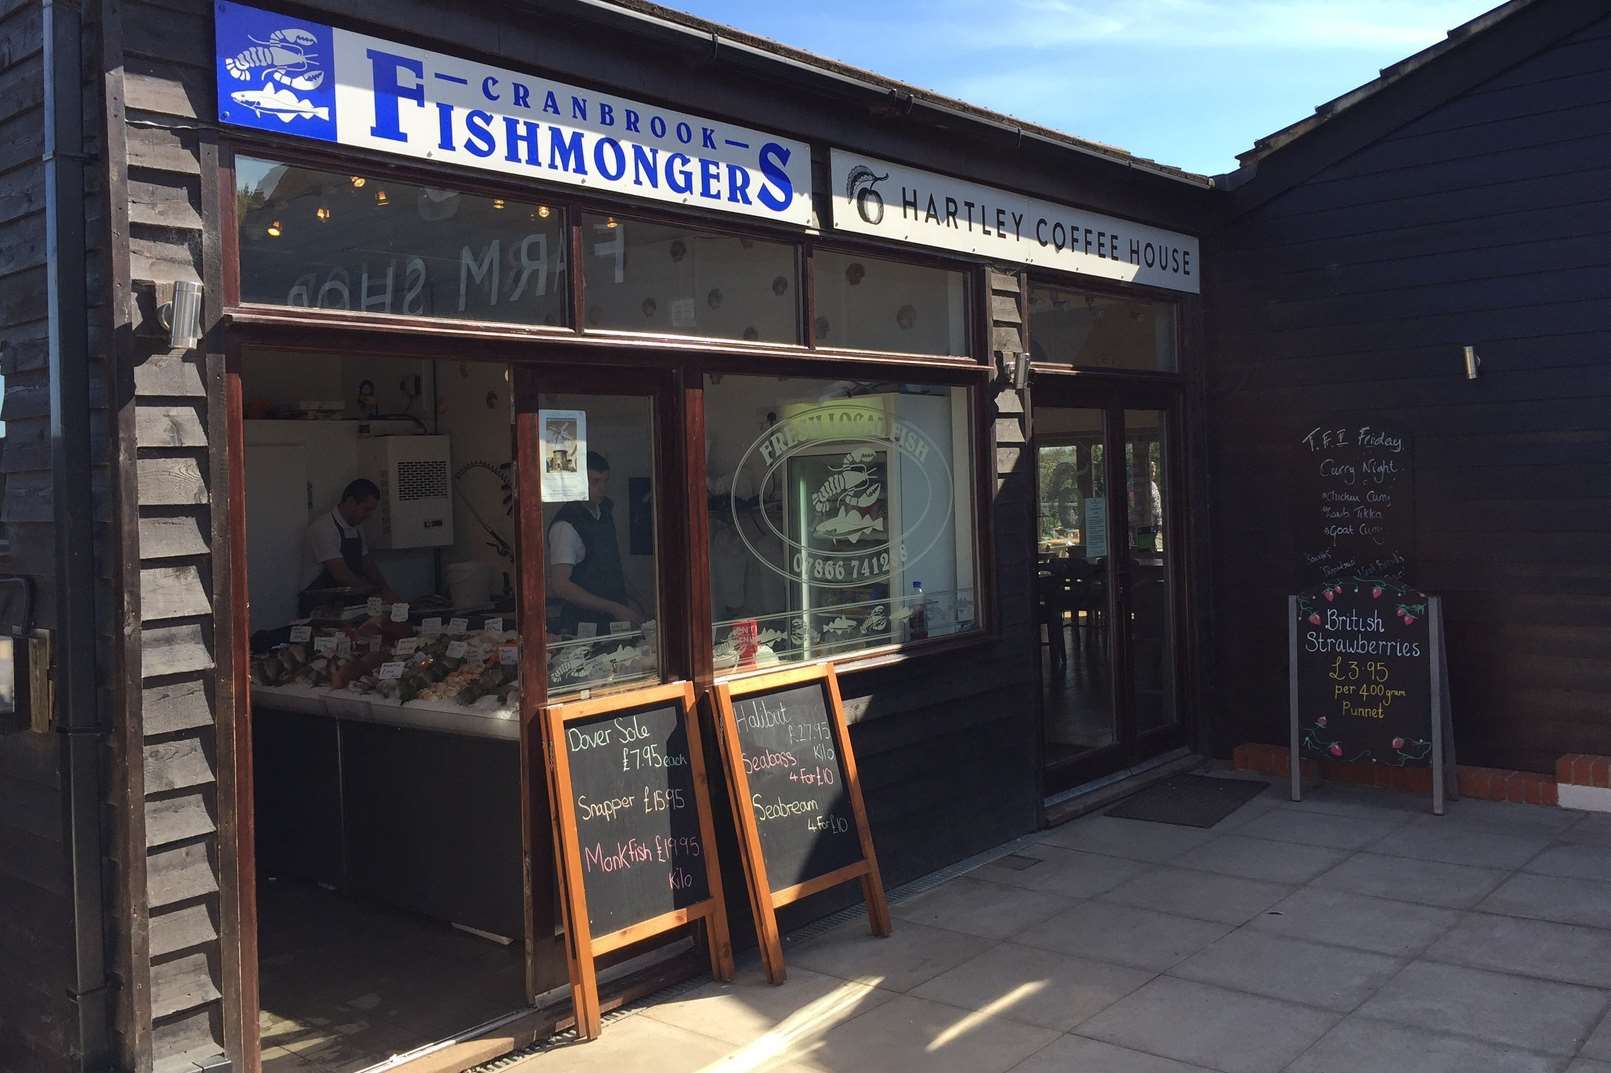 The fishmongers was targeted